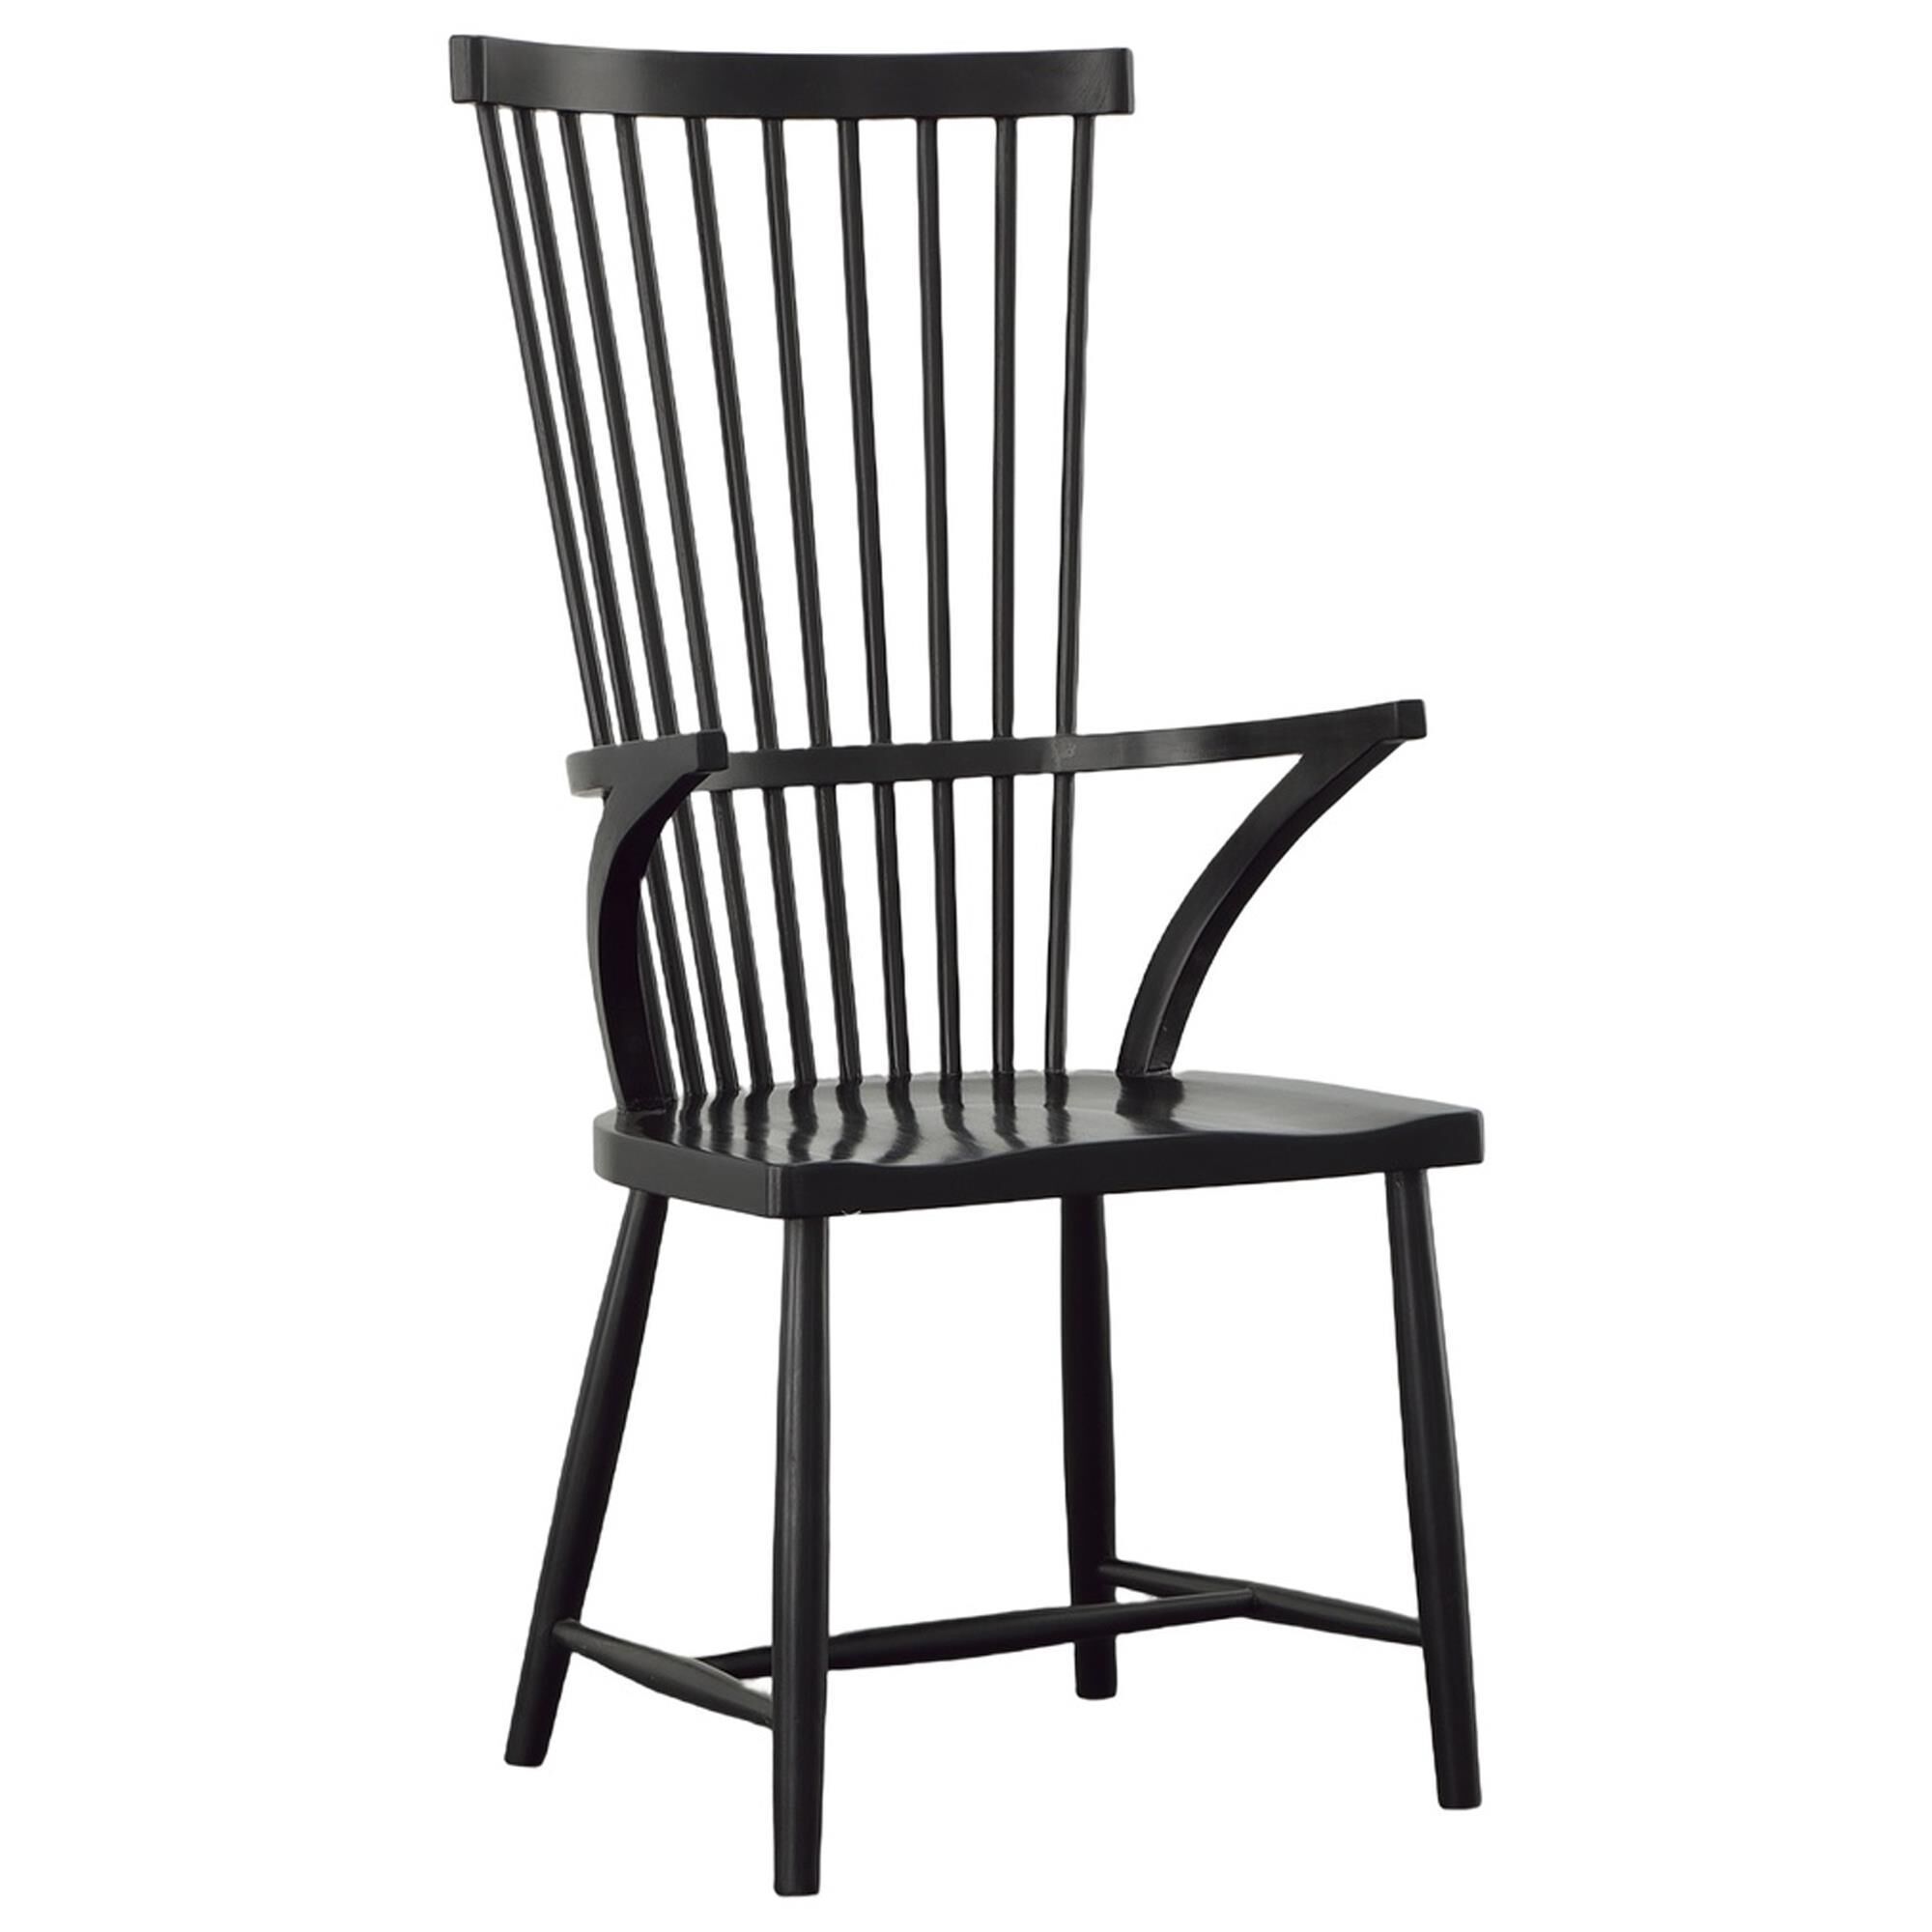 The Timeless Charm of Black Windsor Chairs with Arms